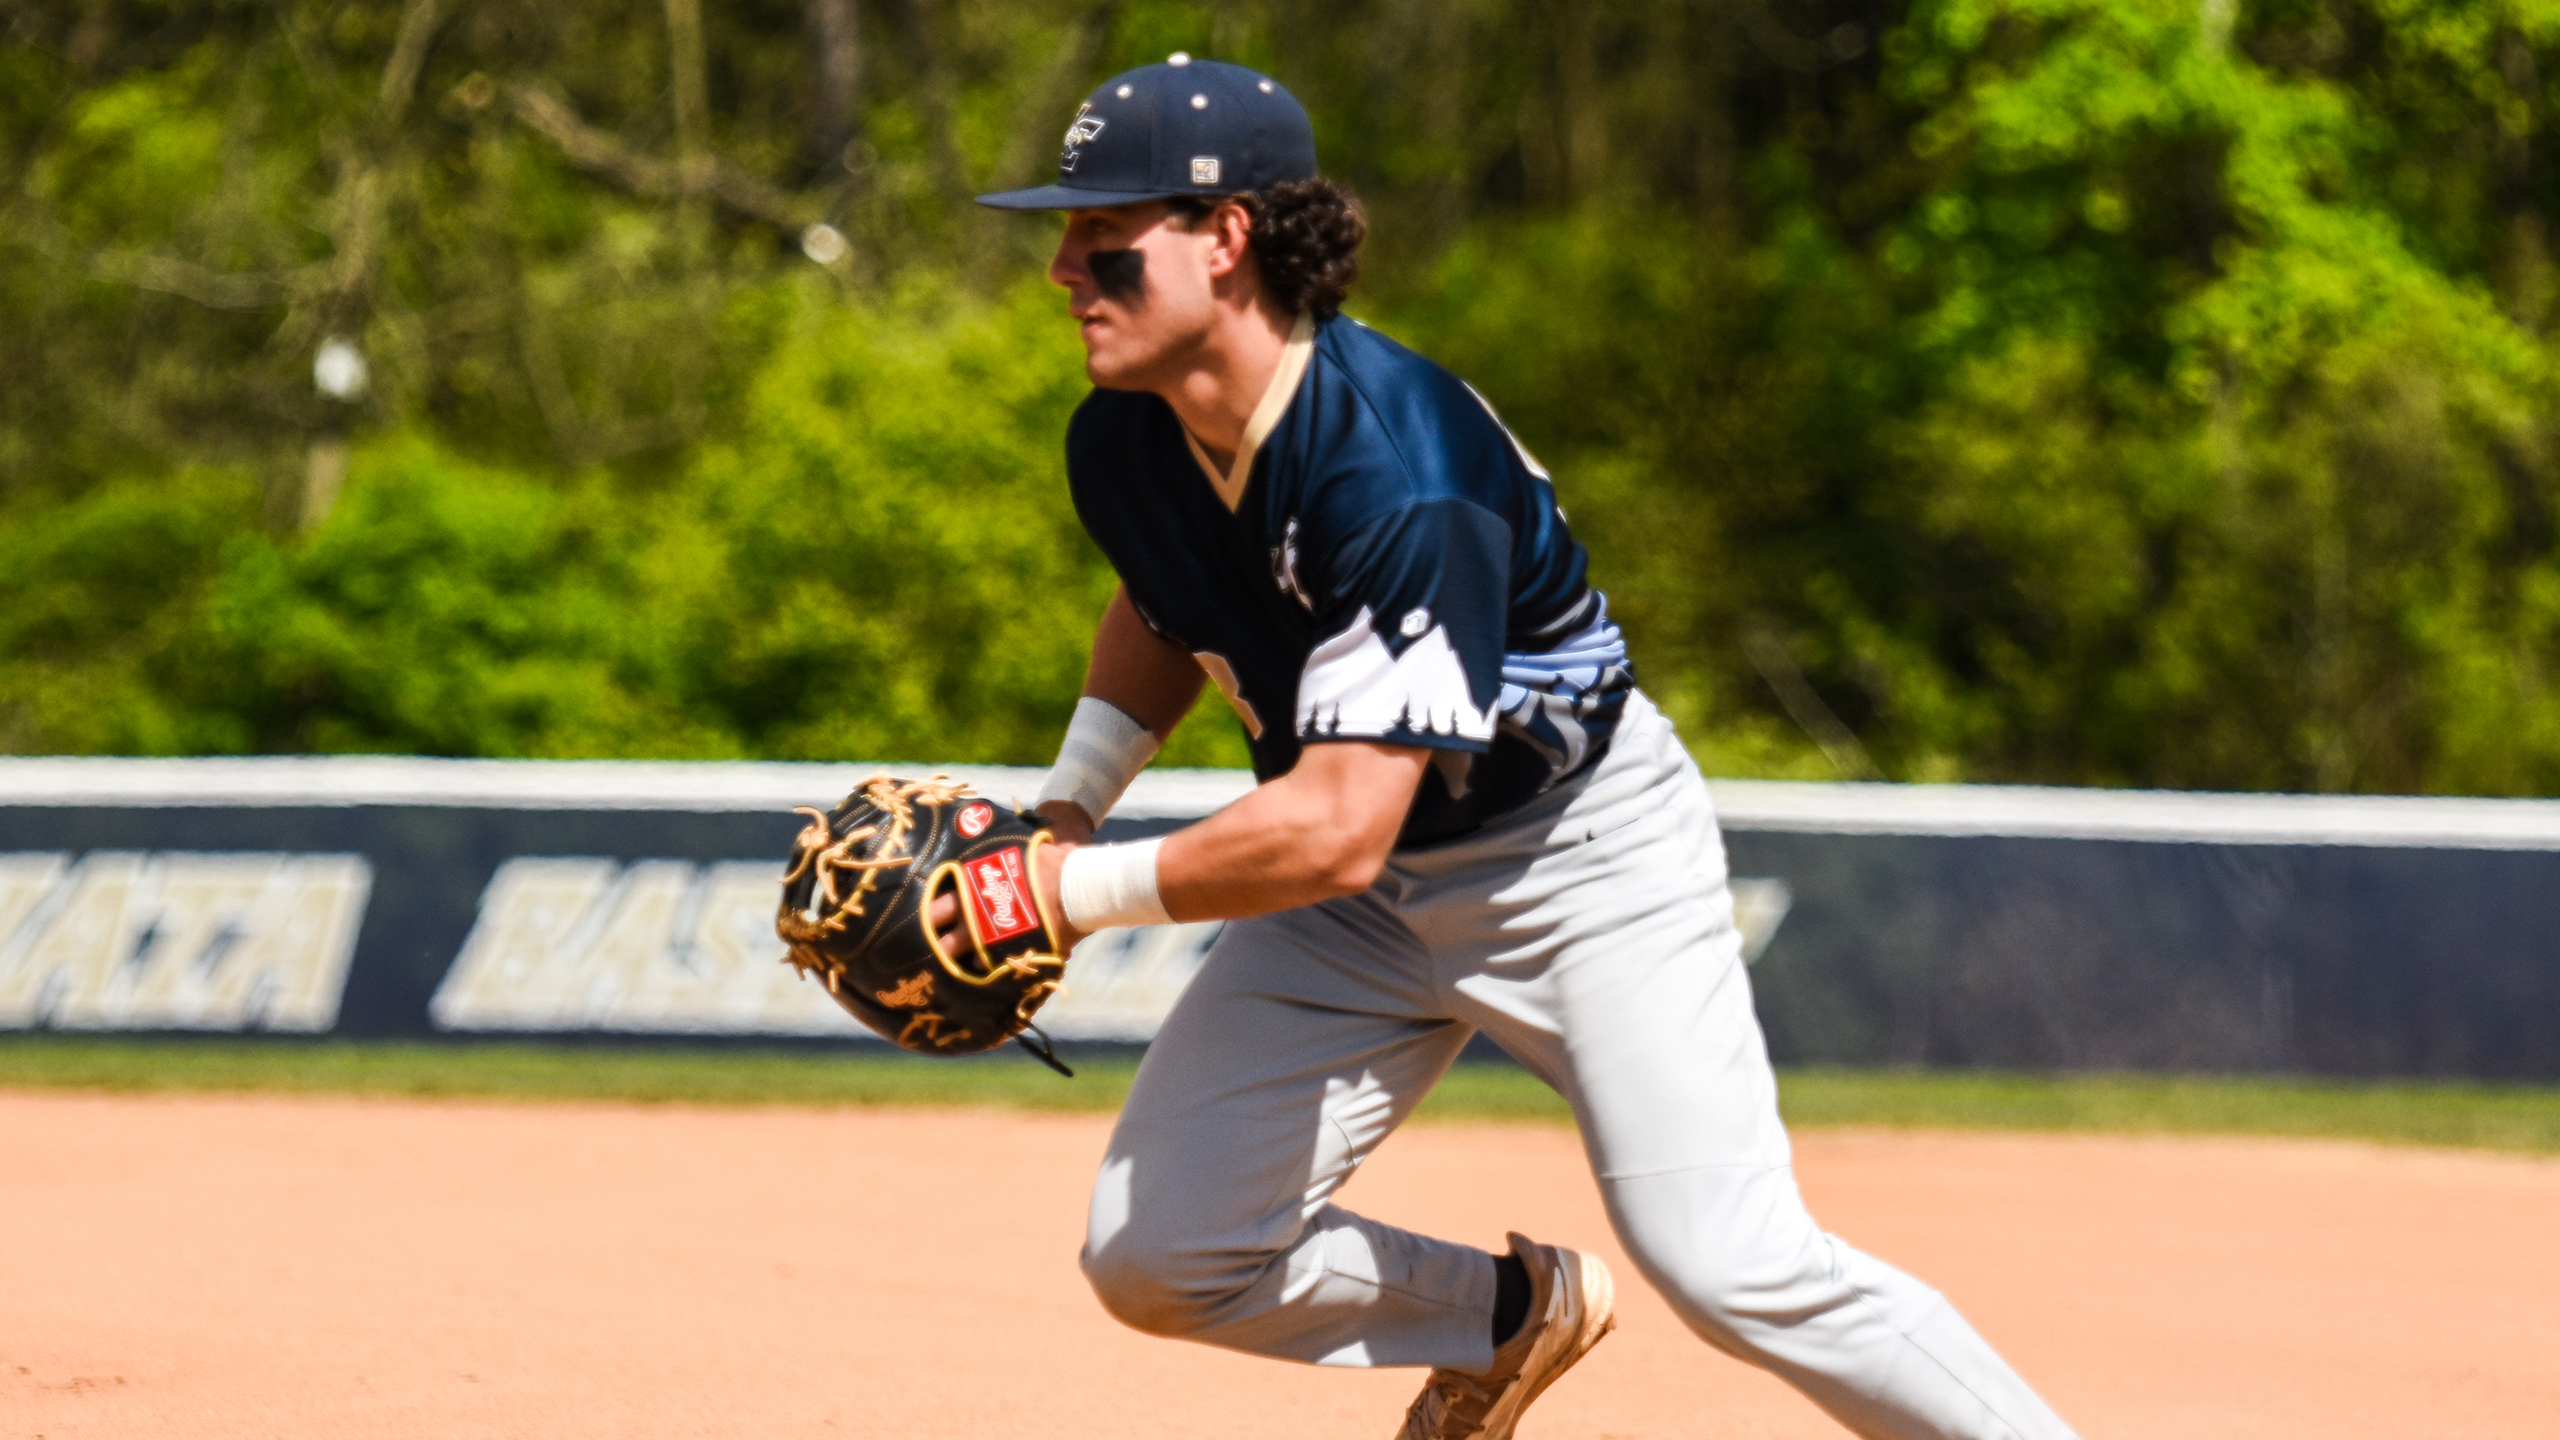 Bats Stay Hot as Baseball Sets Program Record with 33 Runs in Win Over Bears